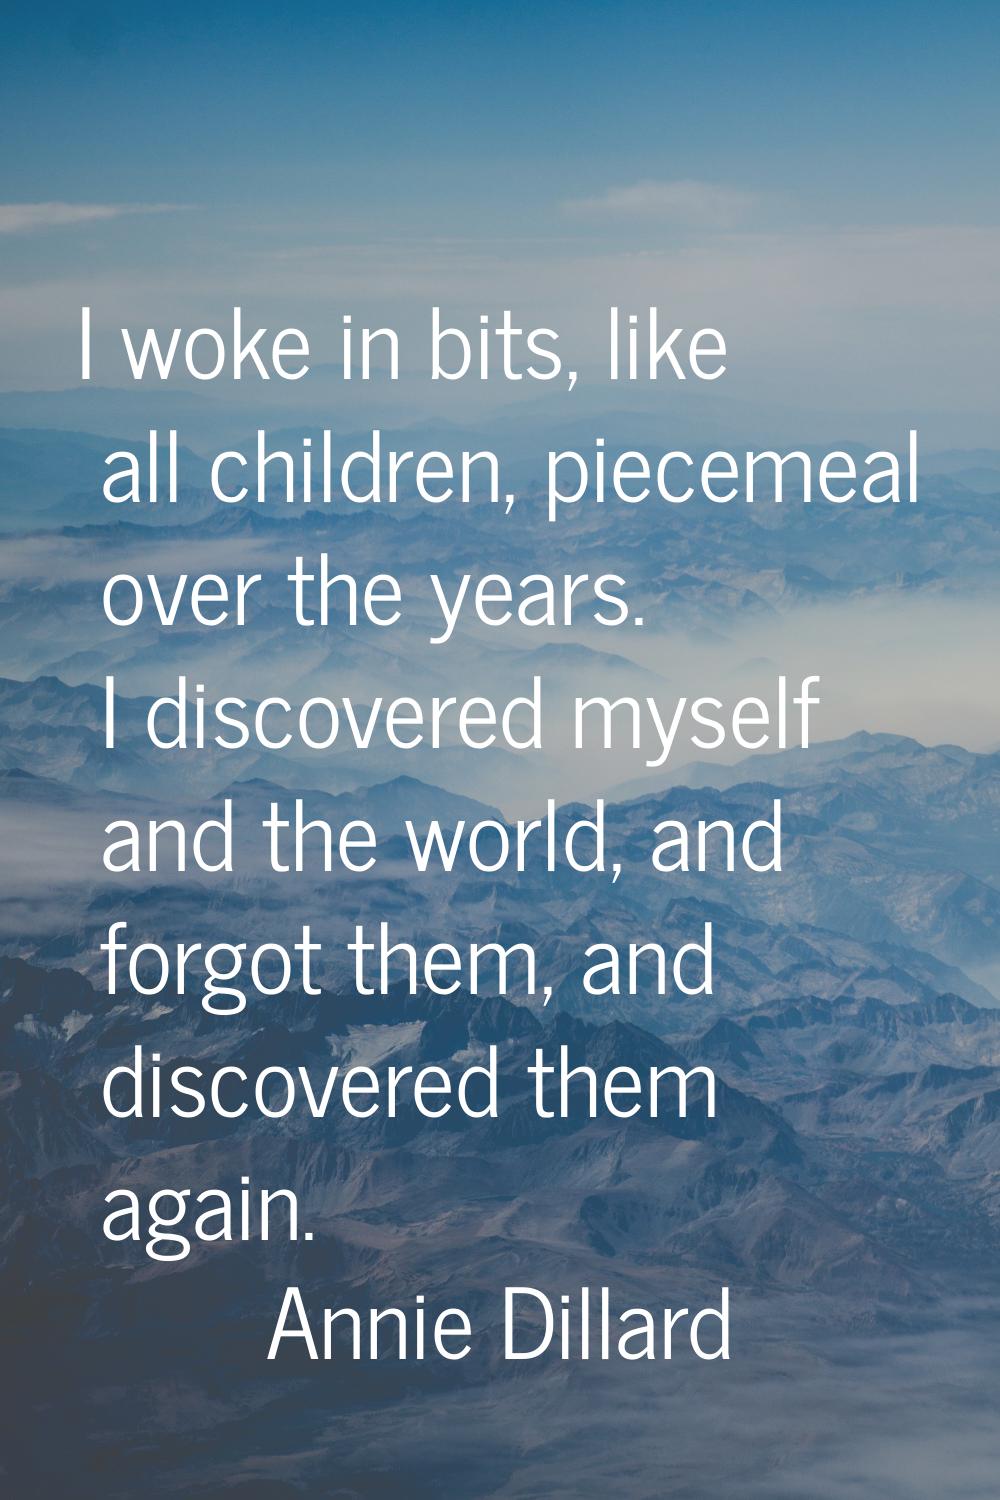 I woke in bits, like all children, piecemeal over the years. I discovered myself and the world, and